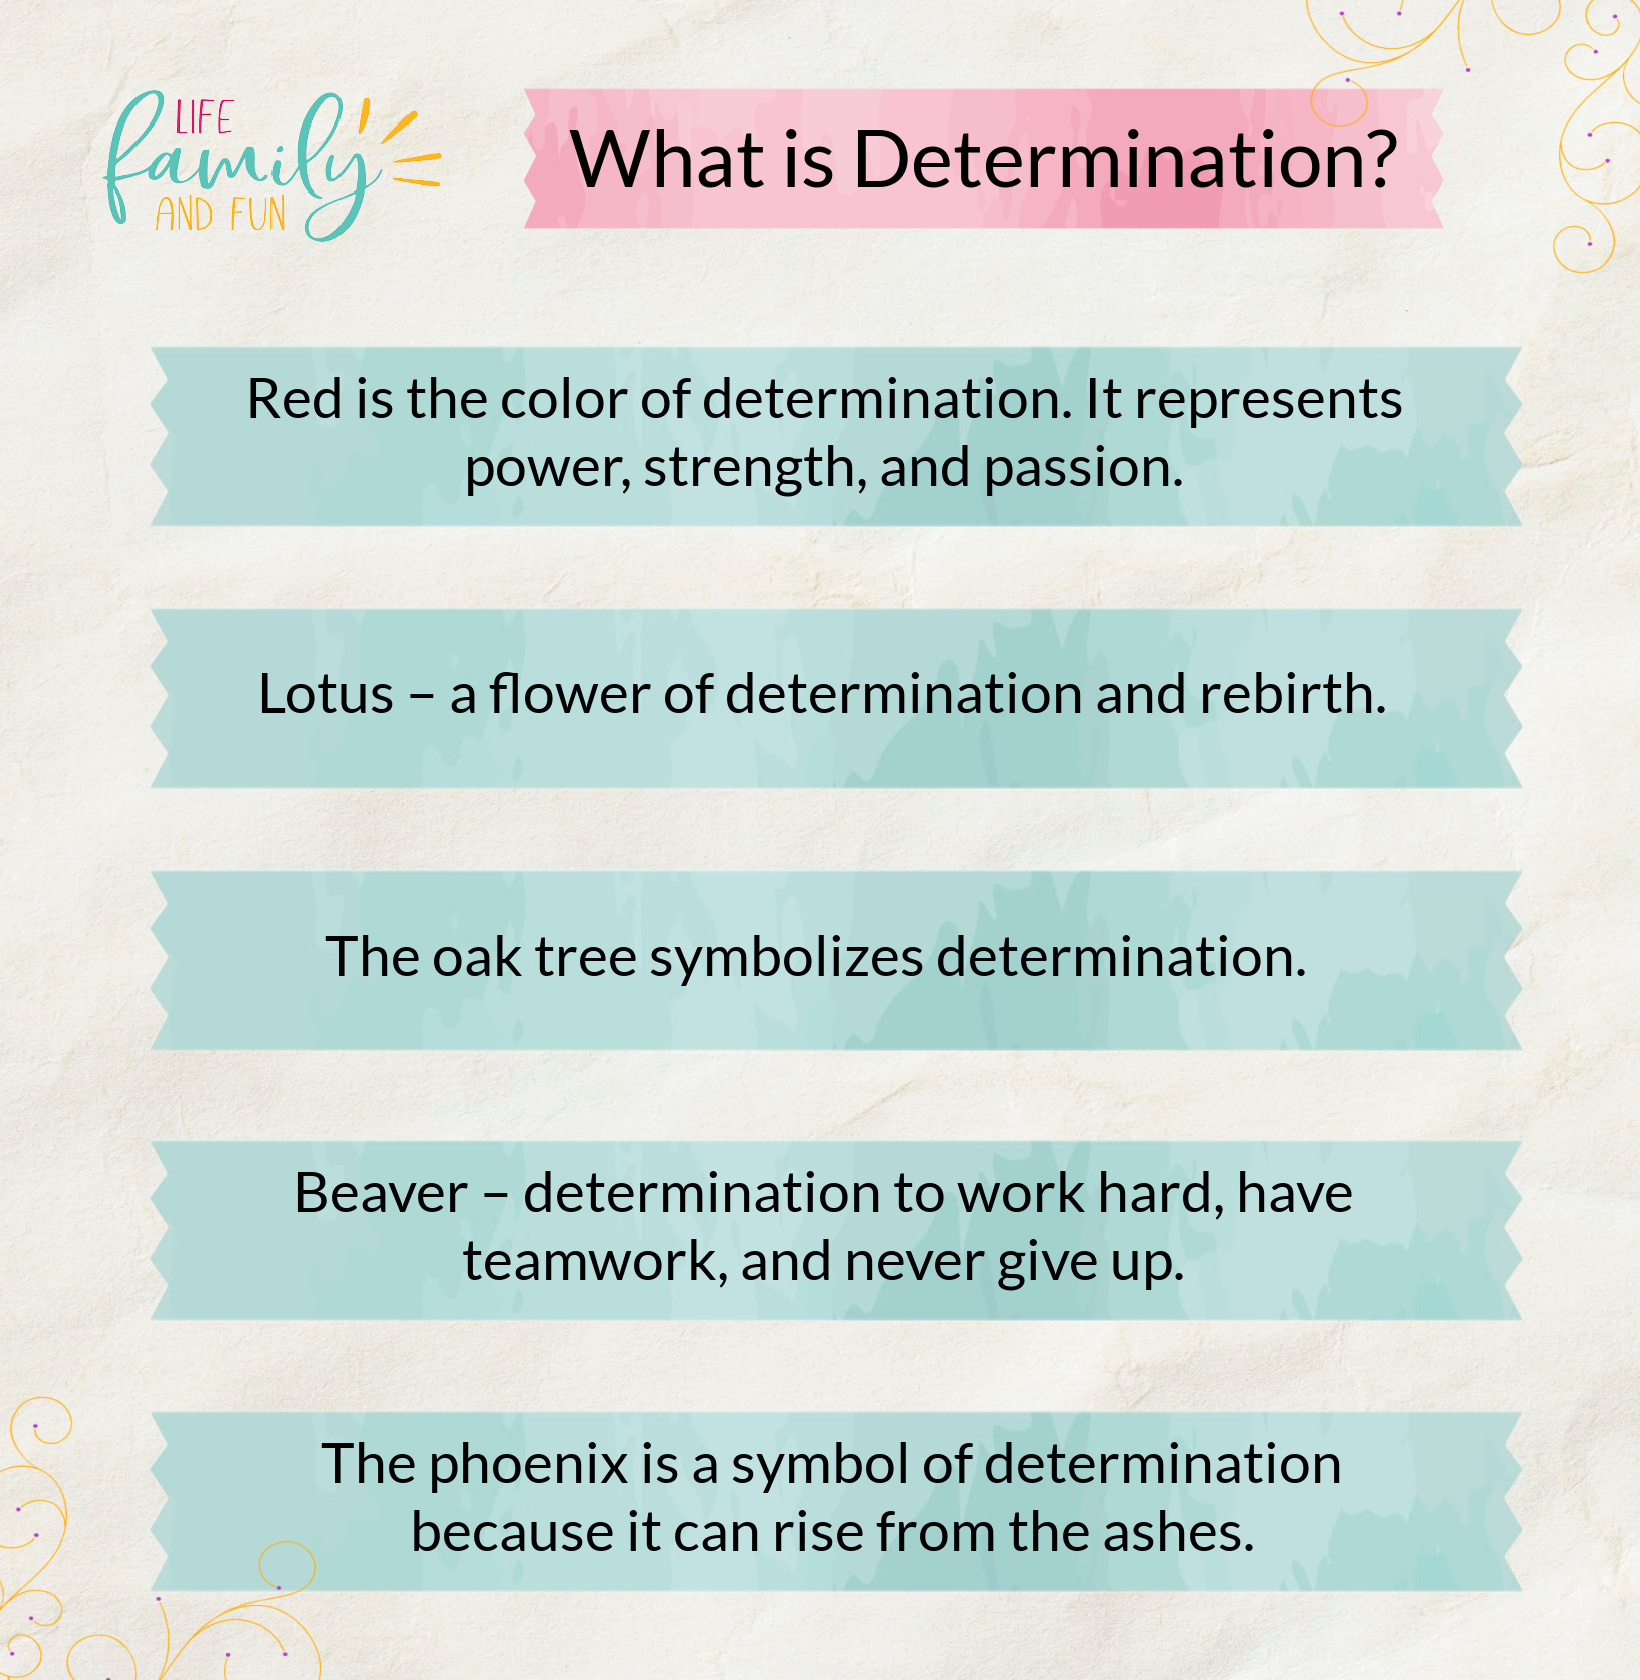 What is Determination?